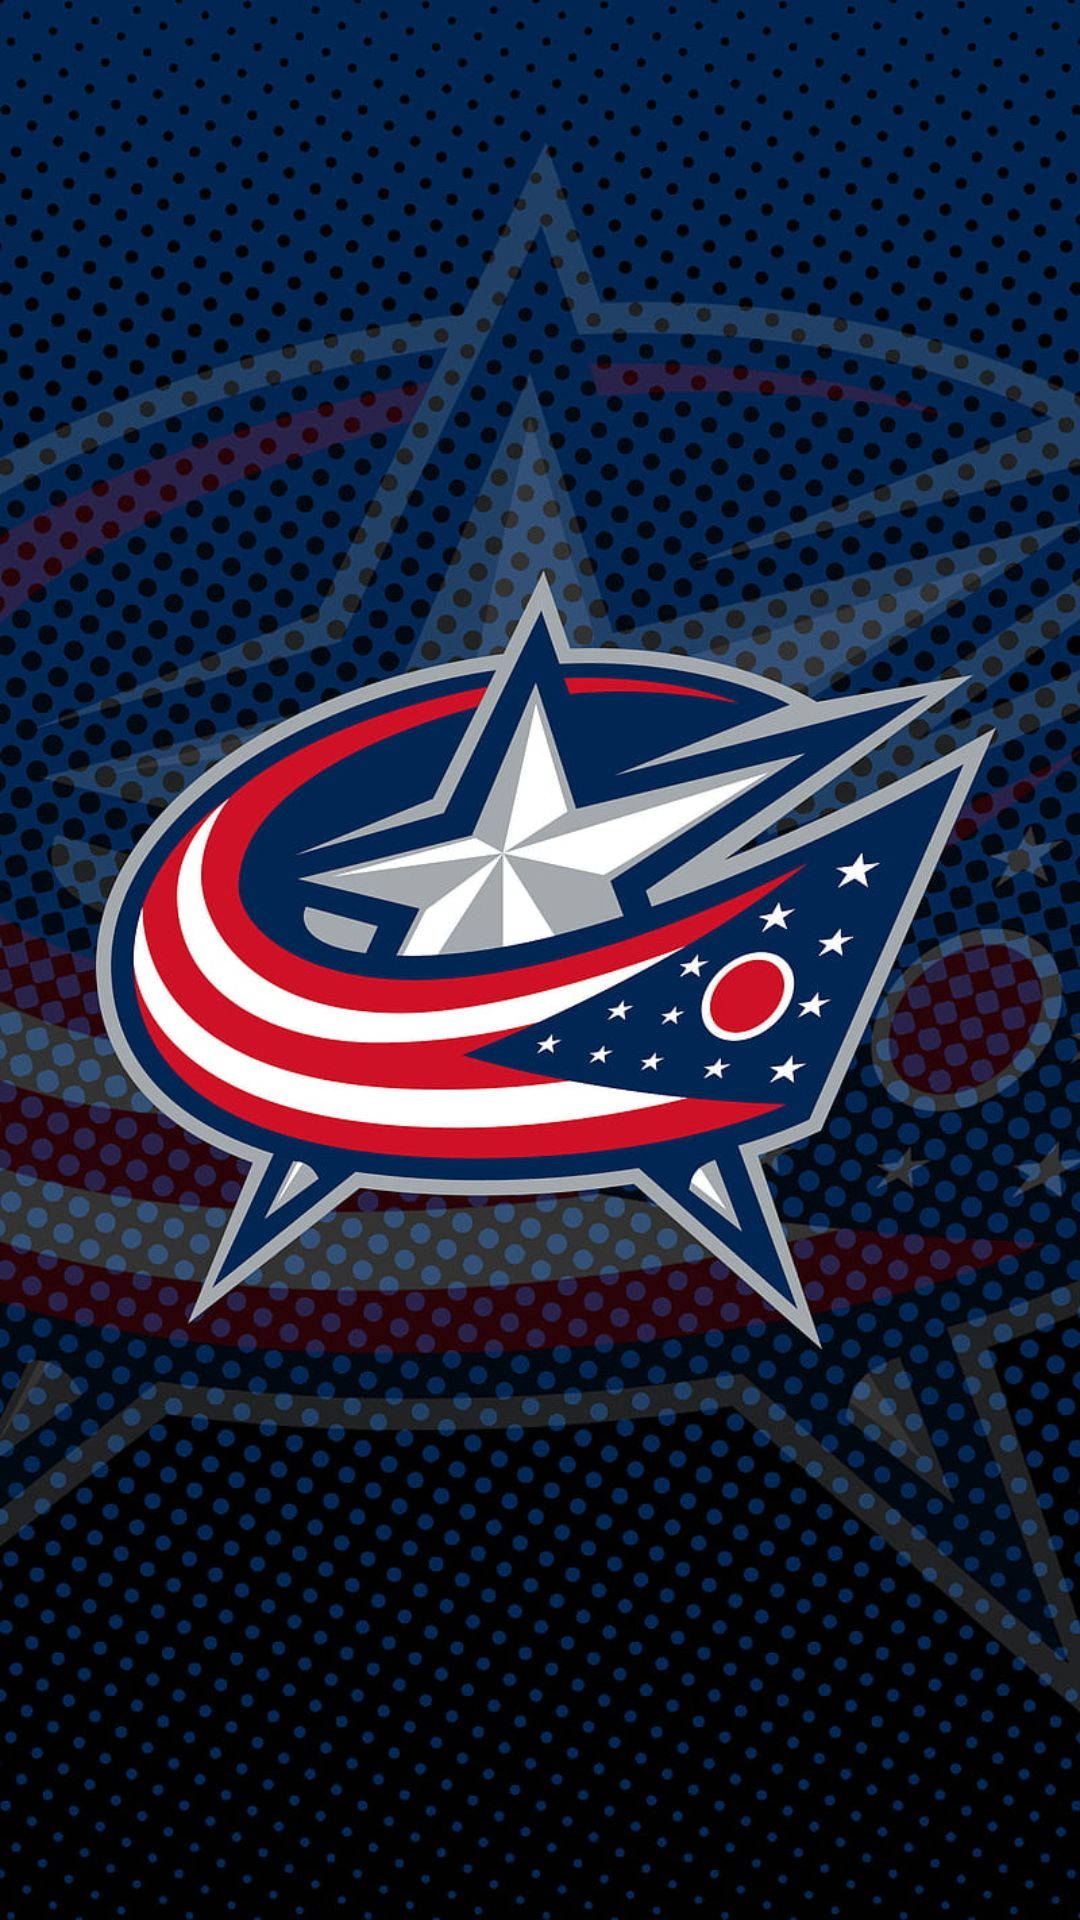 Columbus Blue Jackets On Dotted Background Wallpaper